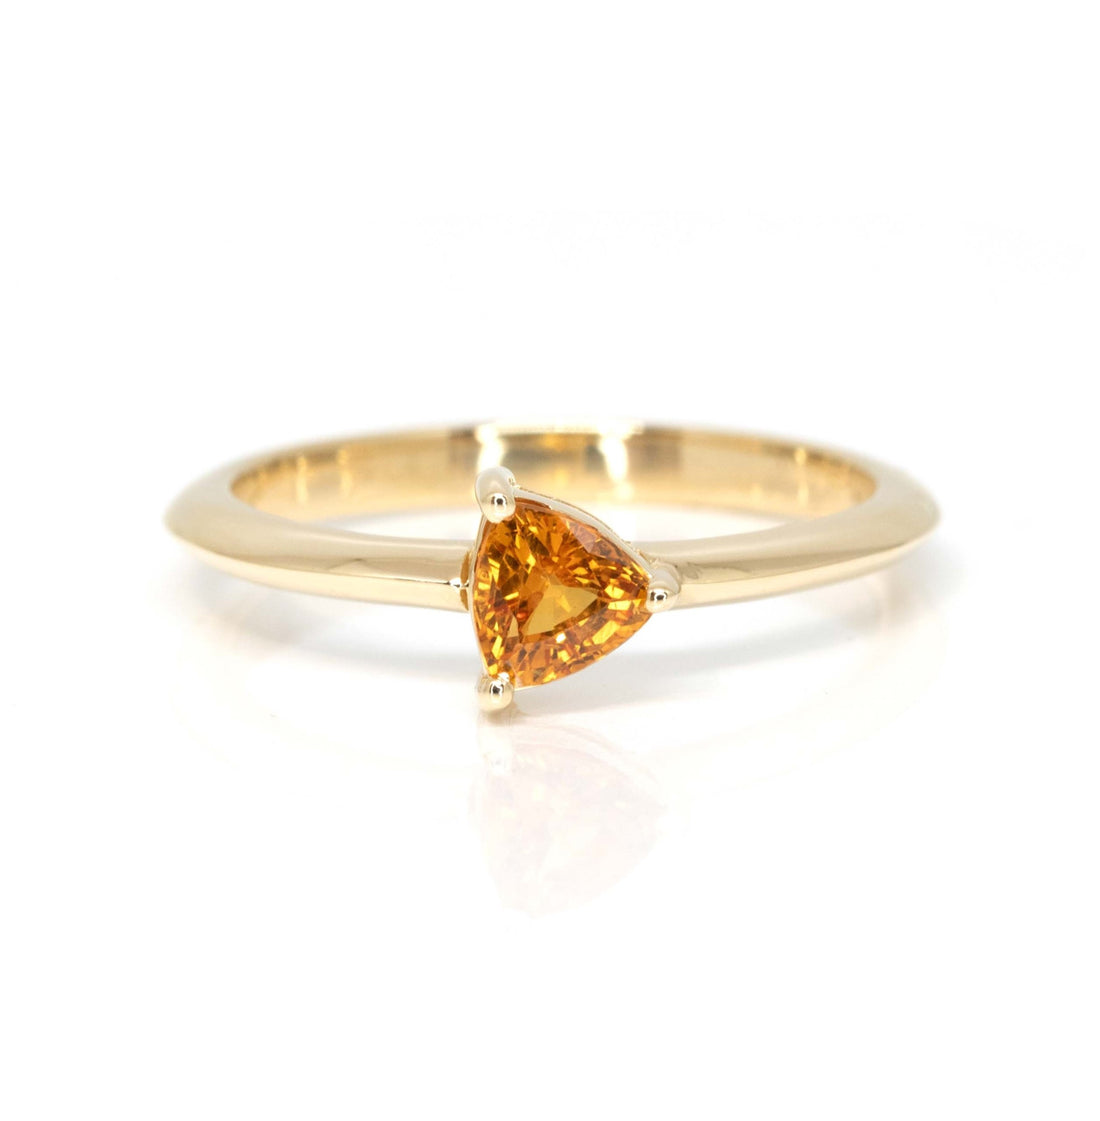 orange sapphire trillion shape yellow gold bridal ring made in montreal by bena jewelry designer on a white background